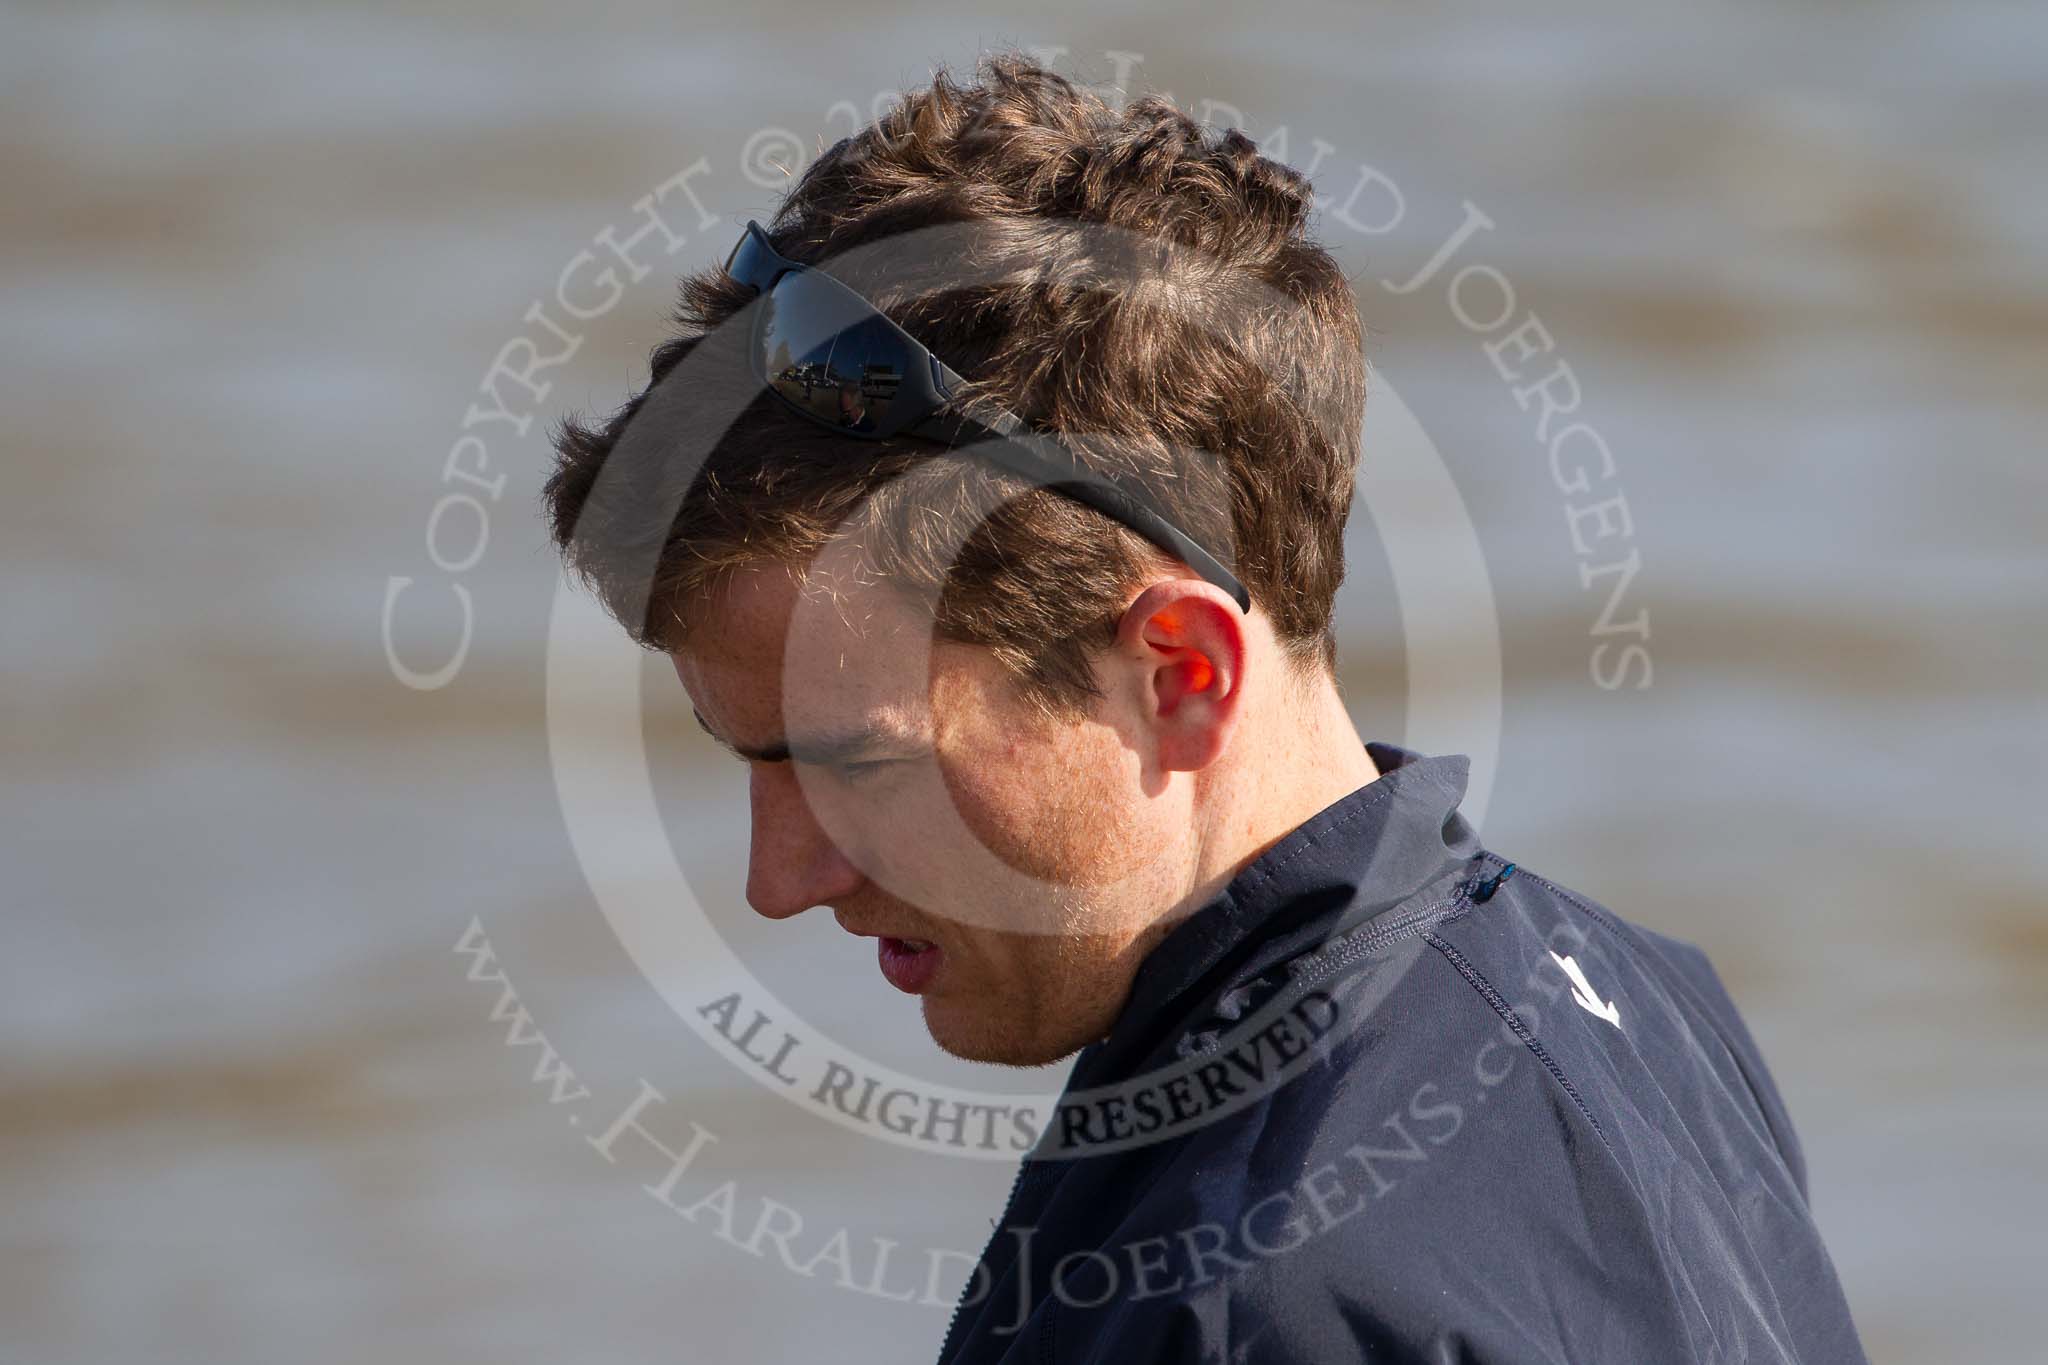 The Boat Race season 2012 - Tideway Week (Tuesday).




on 03 April 2012 at 10:04, image #8